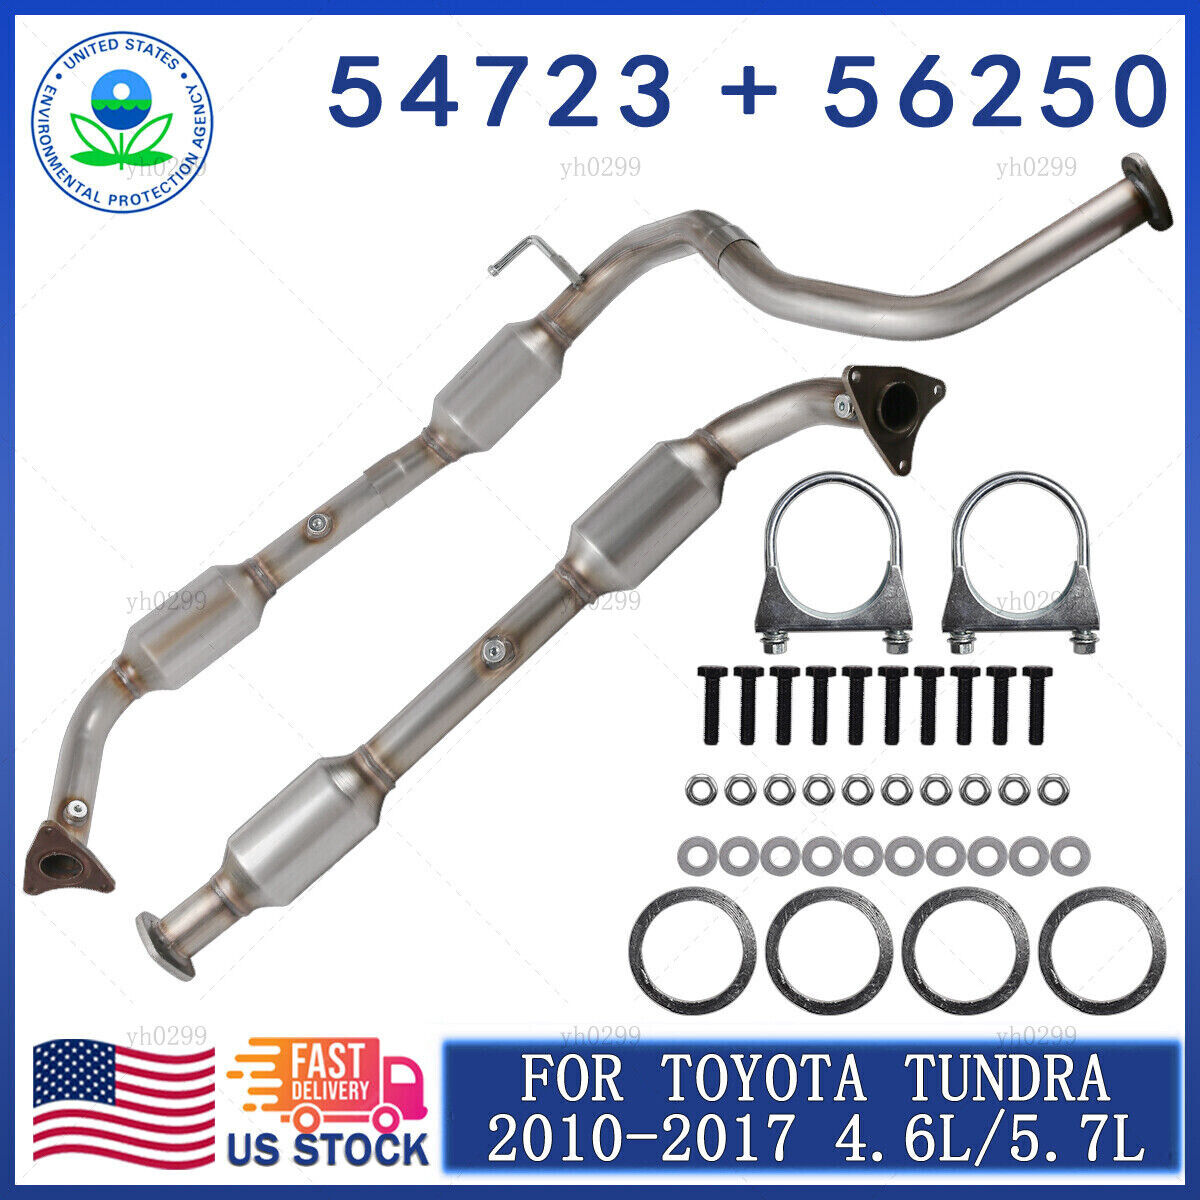 For Toyota Tundra 4.6L/5.7L 2010 2011-2017 Catalytic Converter Set Right & Left